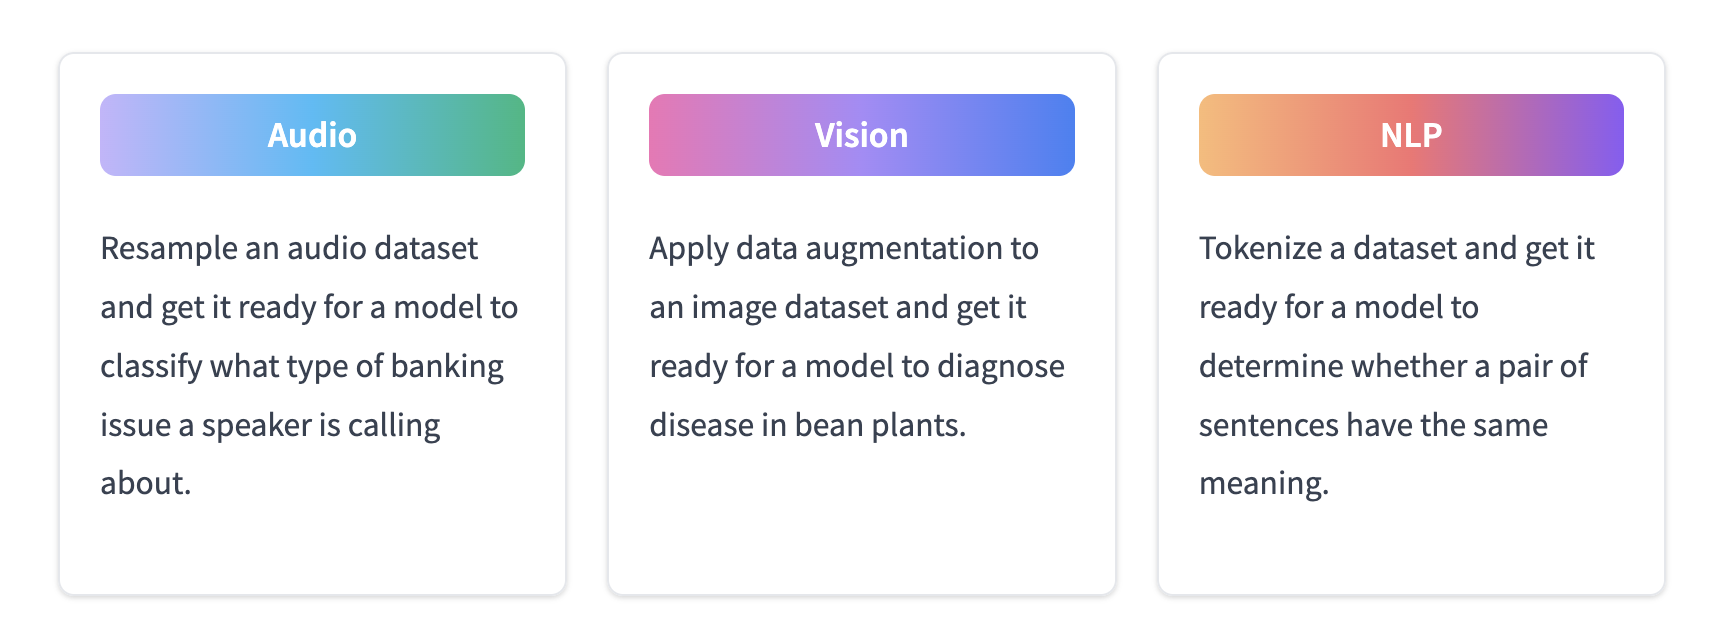 Cards with links to end-to-end examples for how to process audio, vision, and NLP datasets